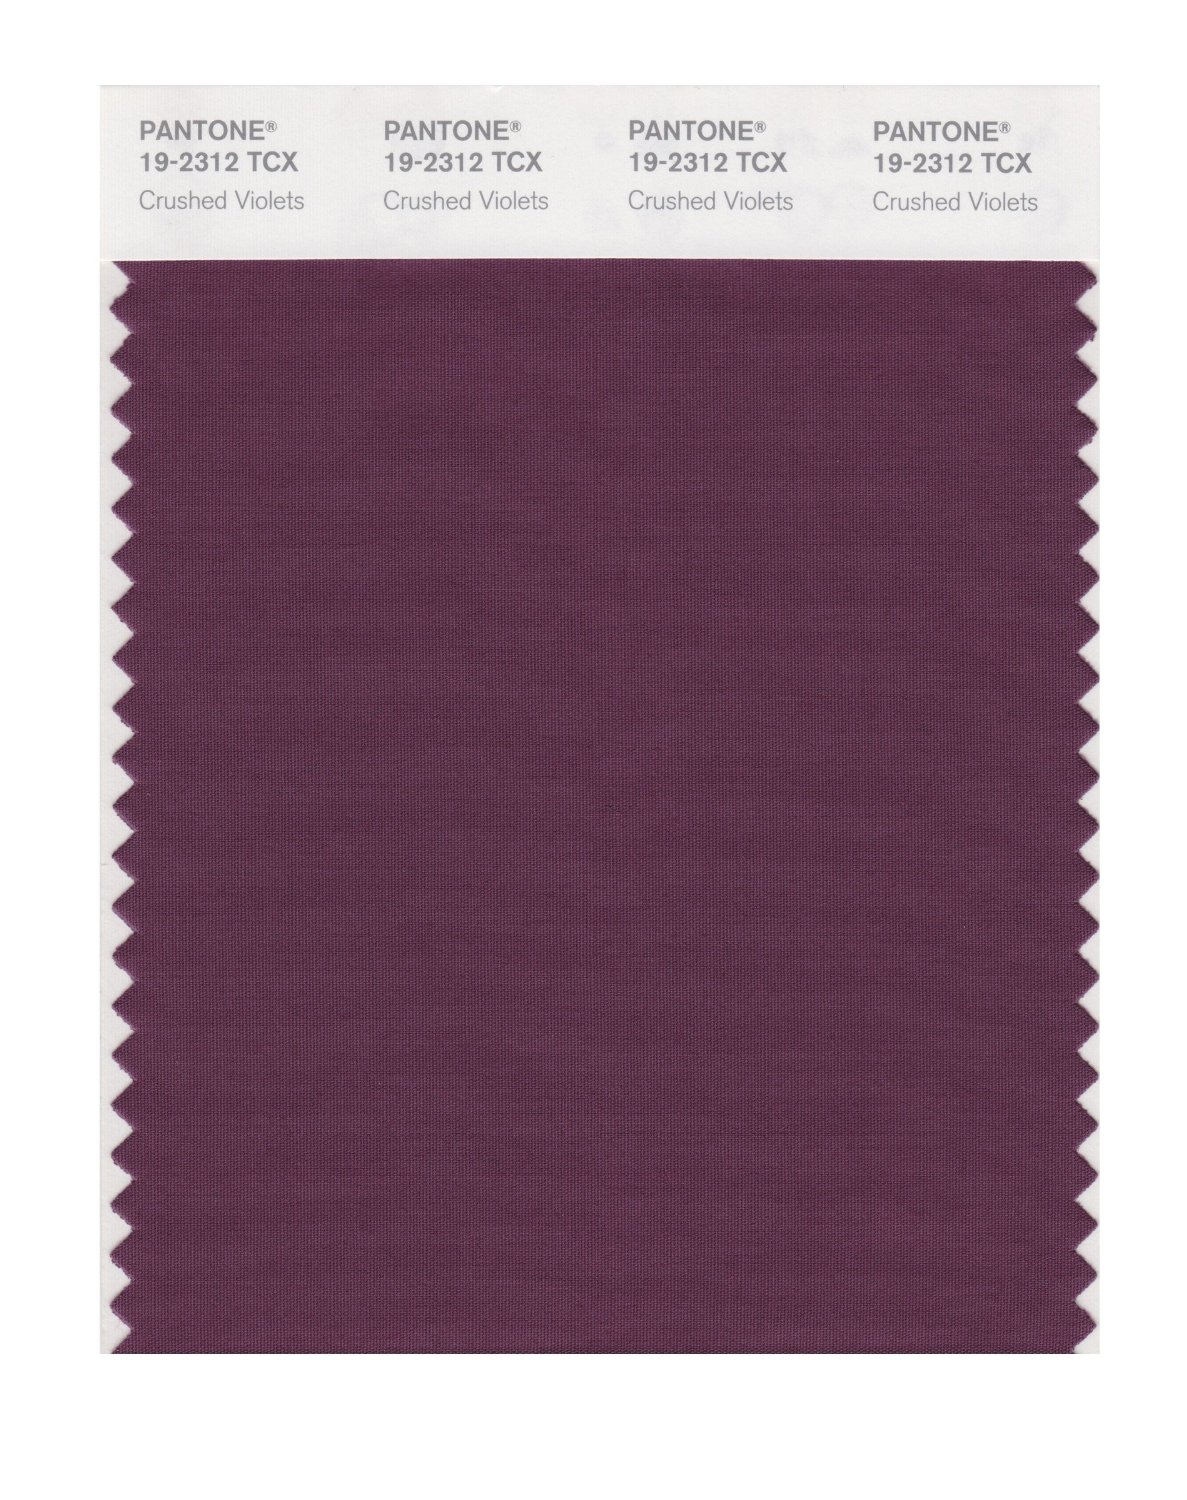 BUY Pantone Cotton Swatch 19-2312 Crushed Violets